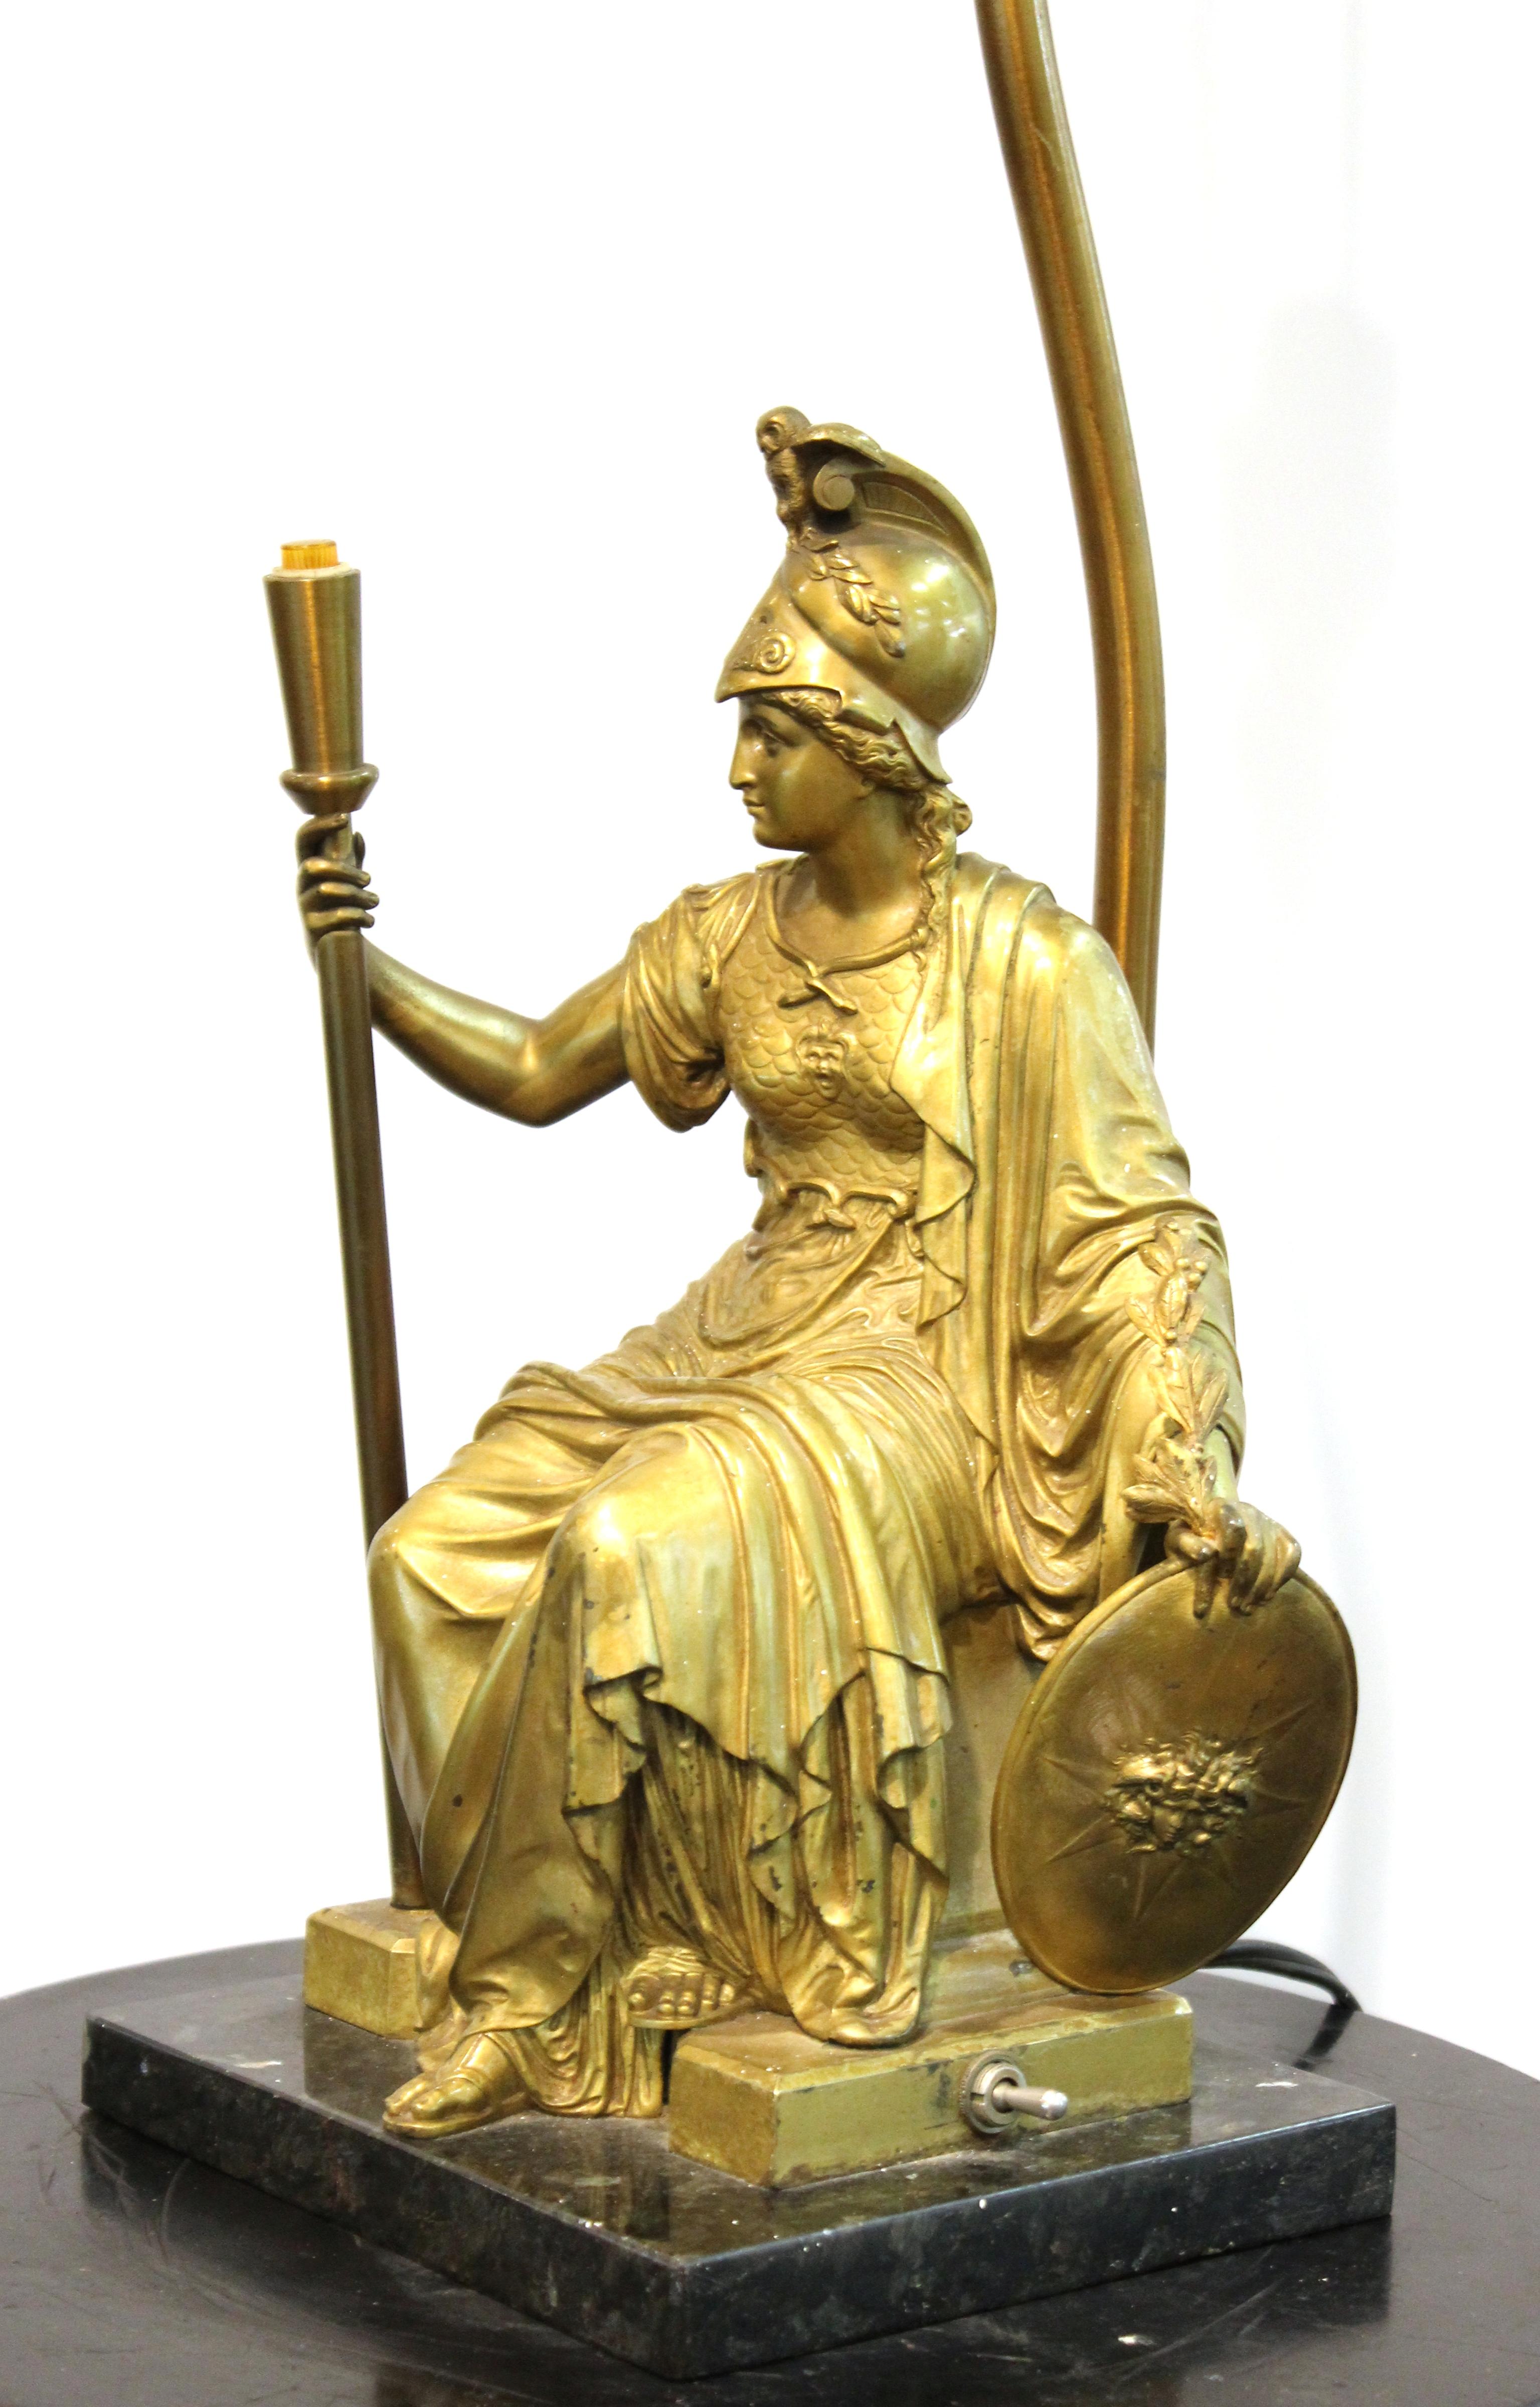 French Neoclassical Revival Style Table Lamp With Seated Bronze Athena Sculpture 2